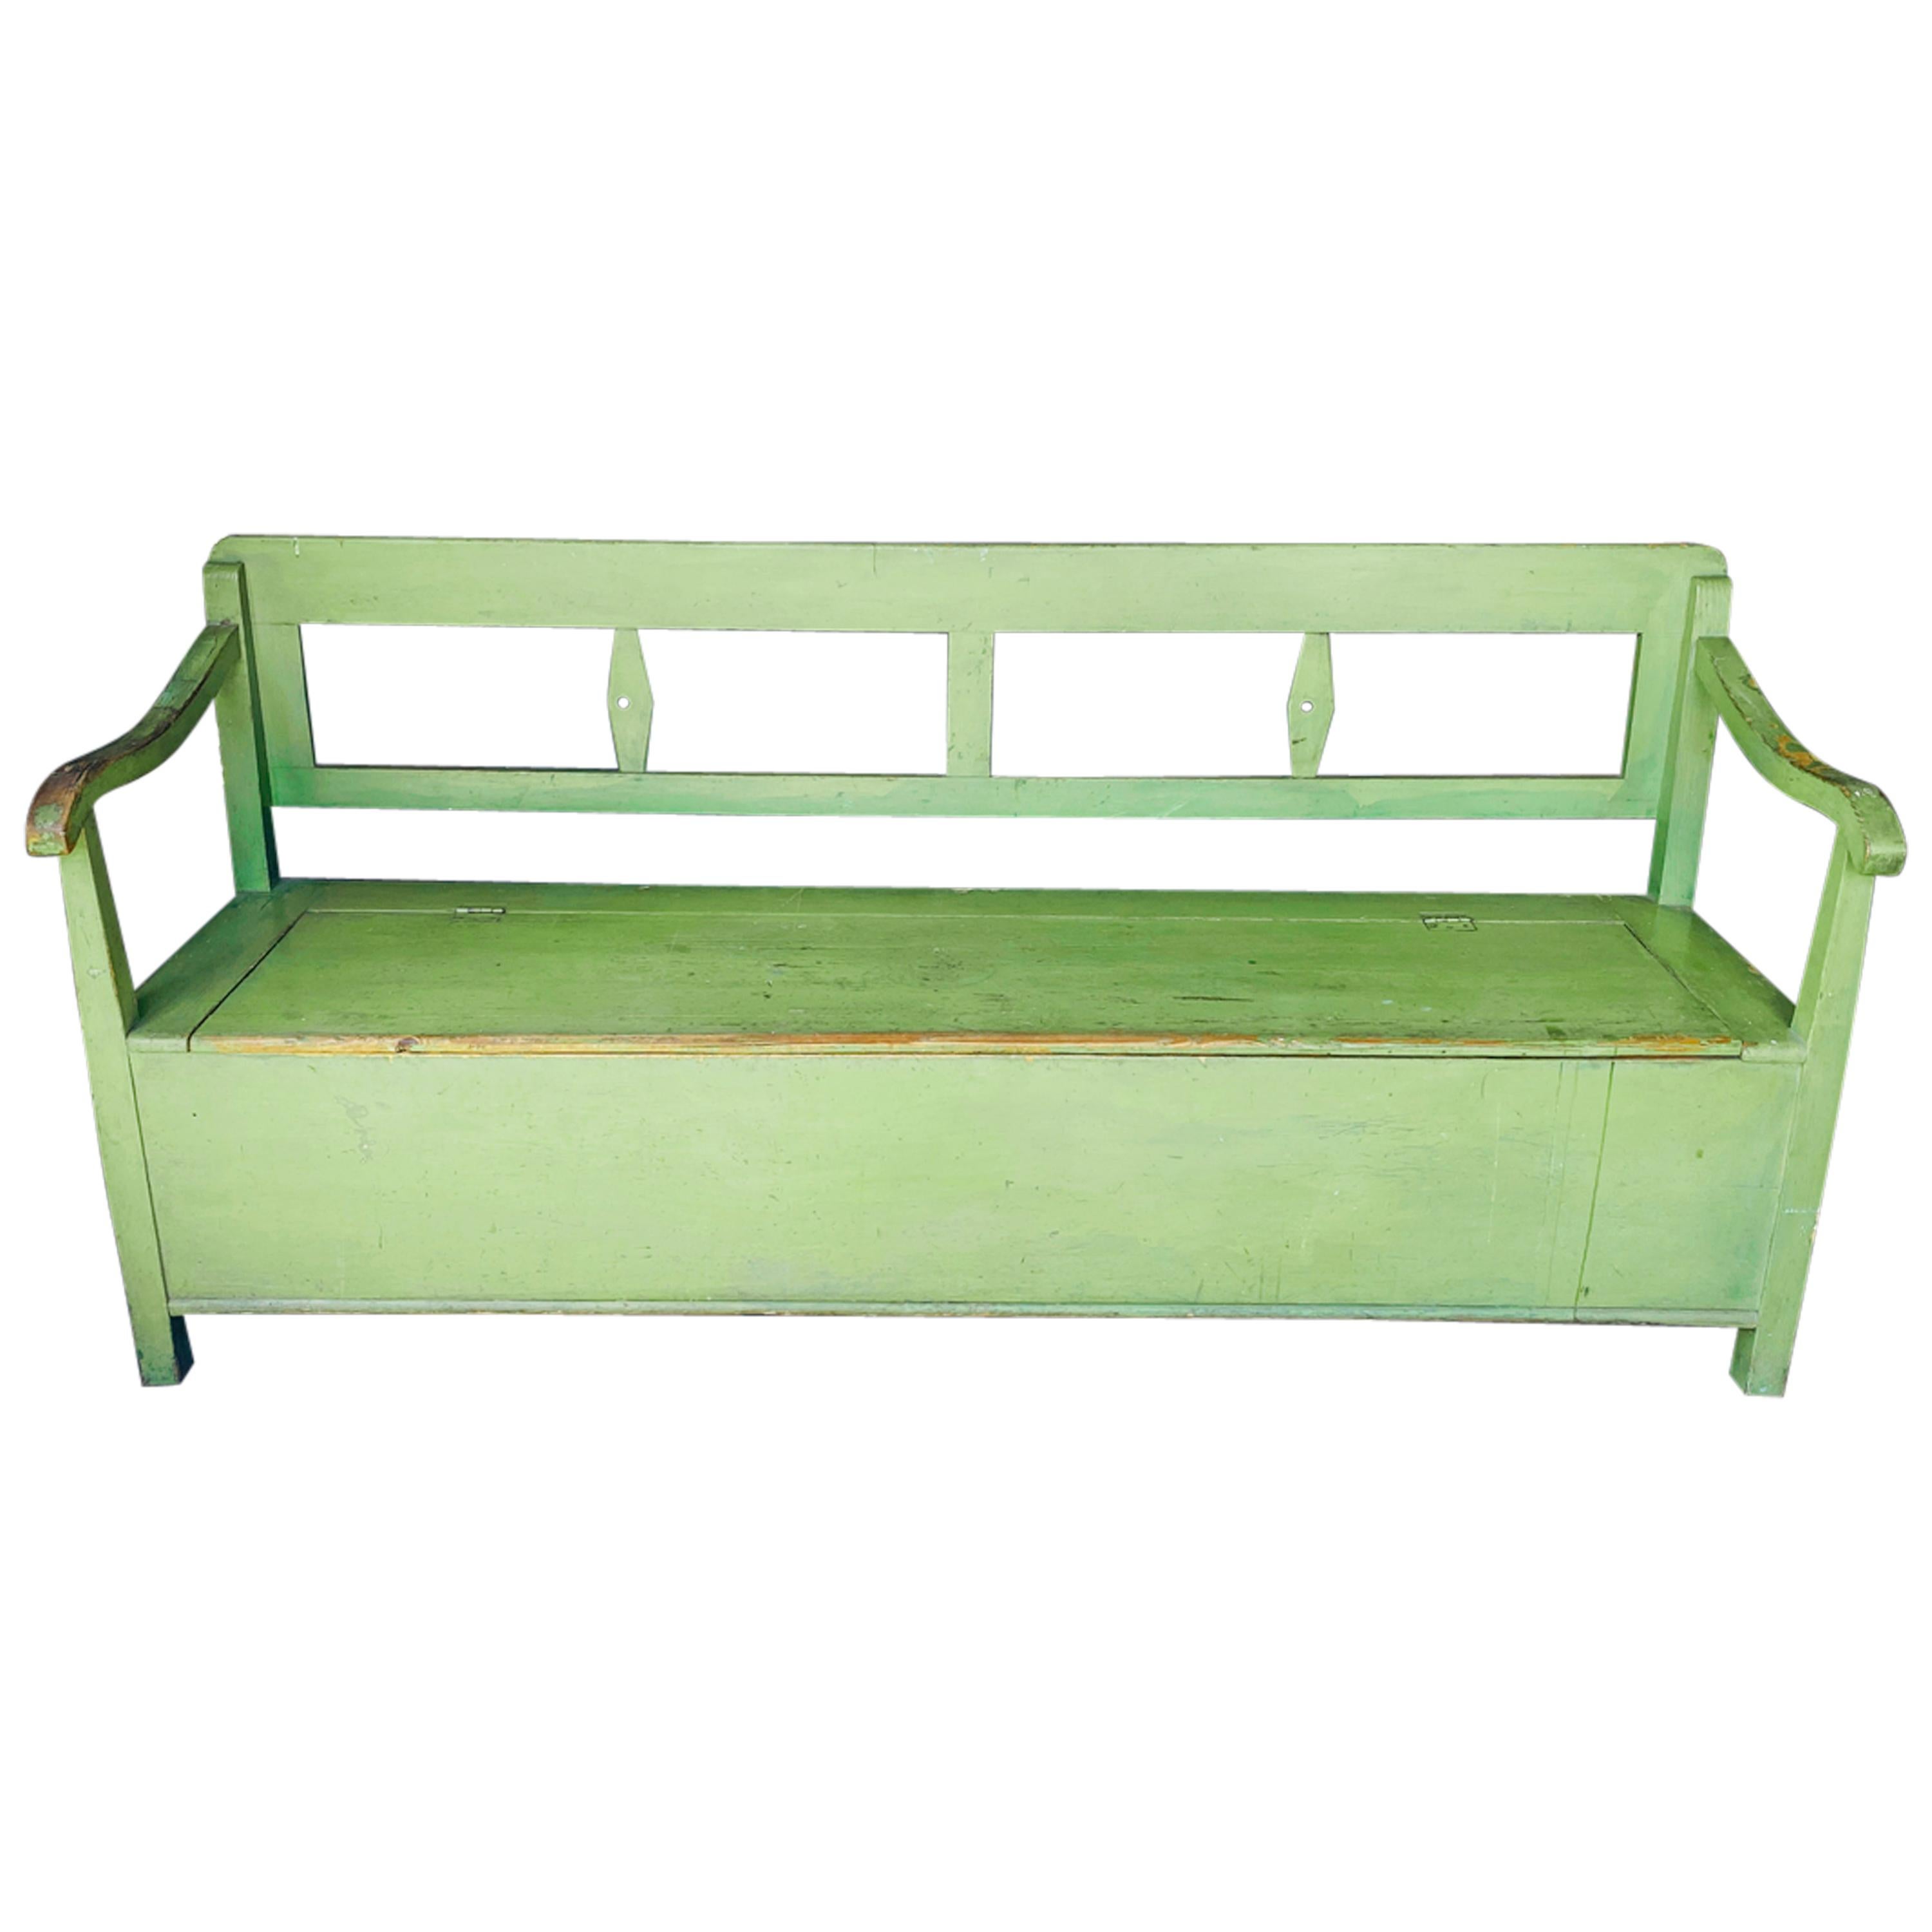 Painted Green Bench with Storage, France, 19th Century